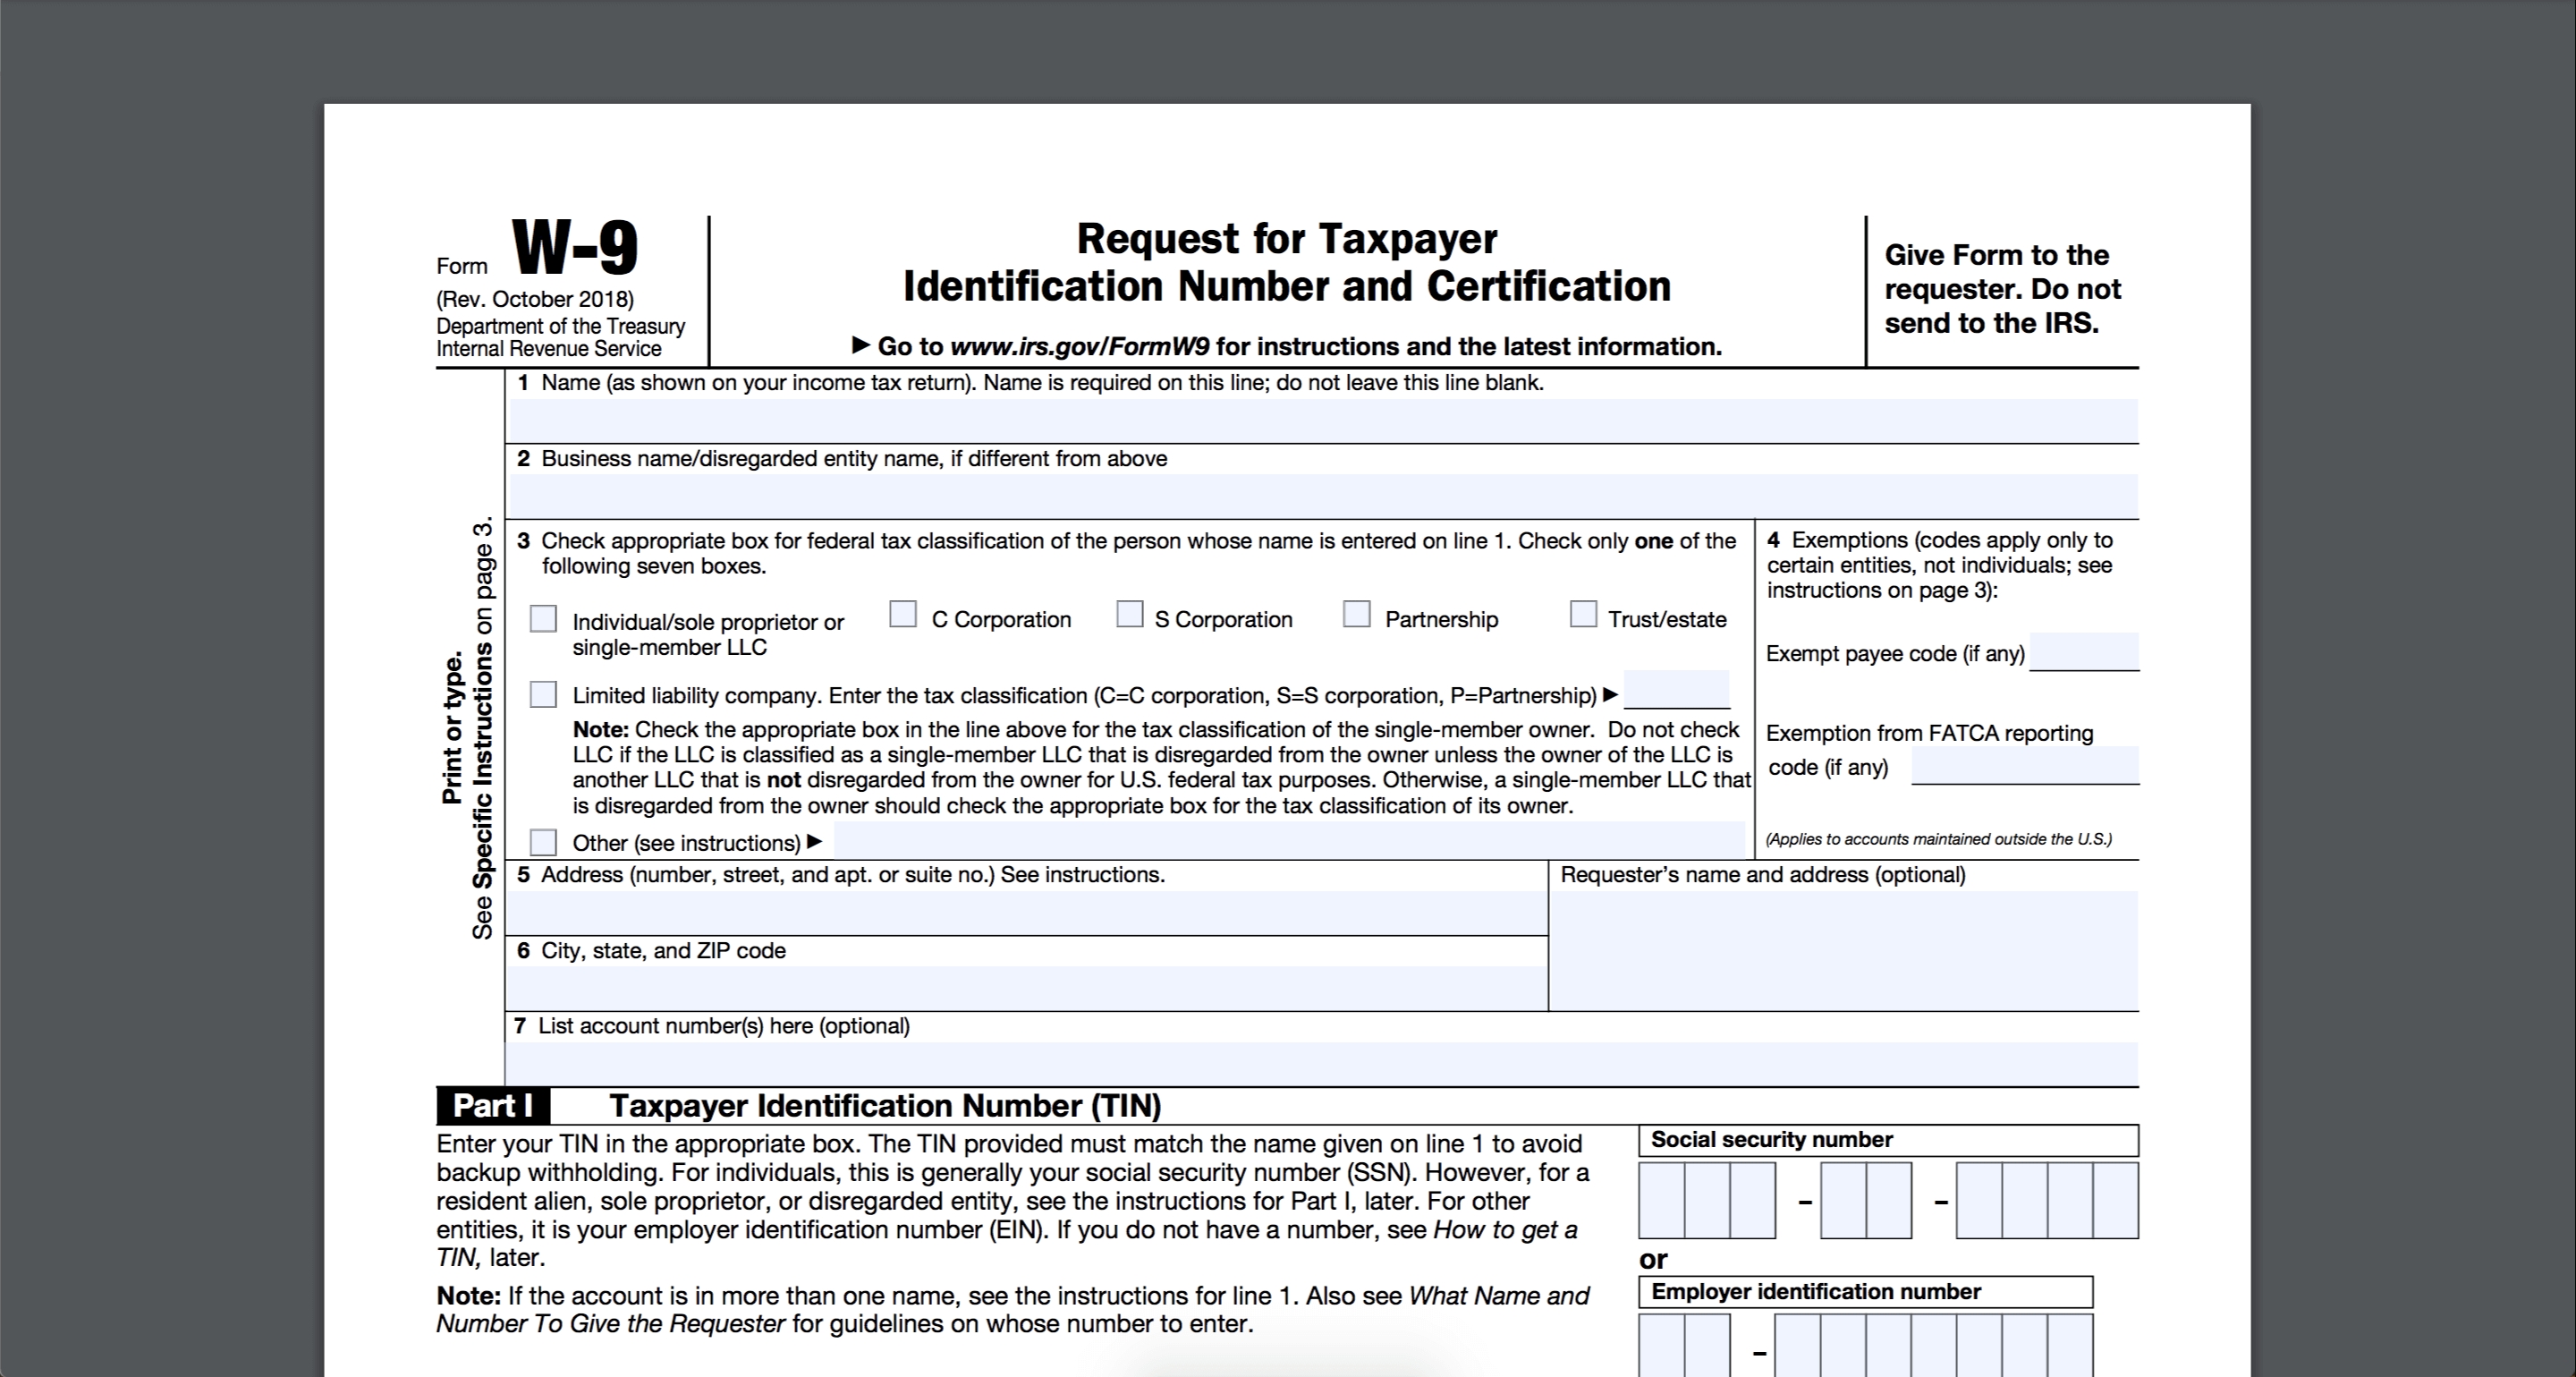 How To Fill Out And Sign Your W-9 Form Online-Blank Irs Forms To Print